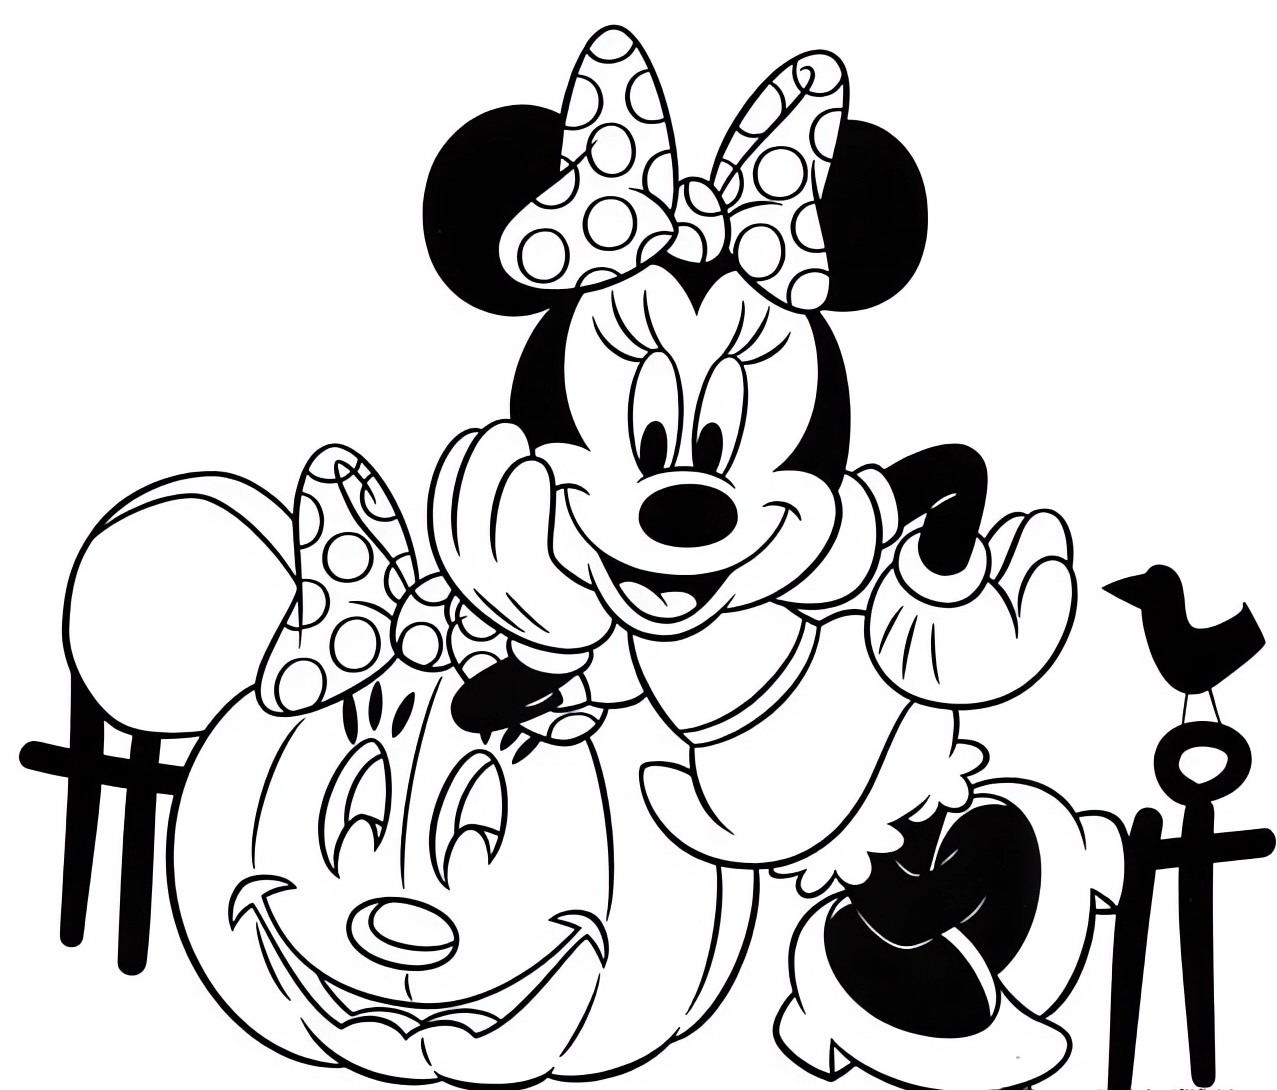 Coloring page of Minnie Mouse with Halloween pumpkin